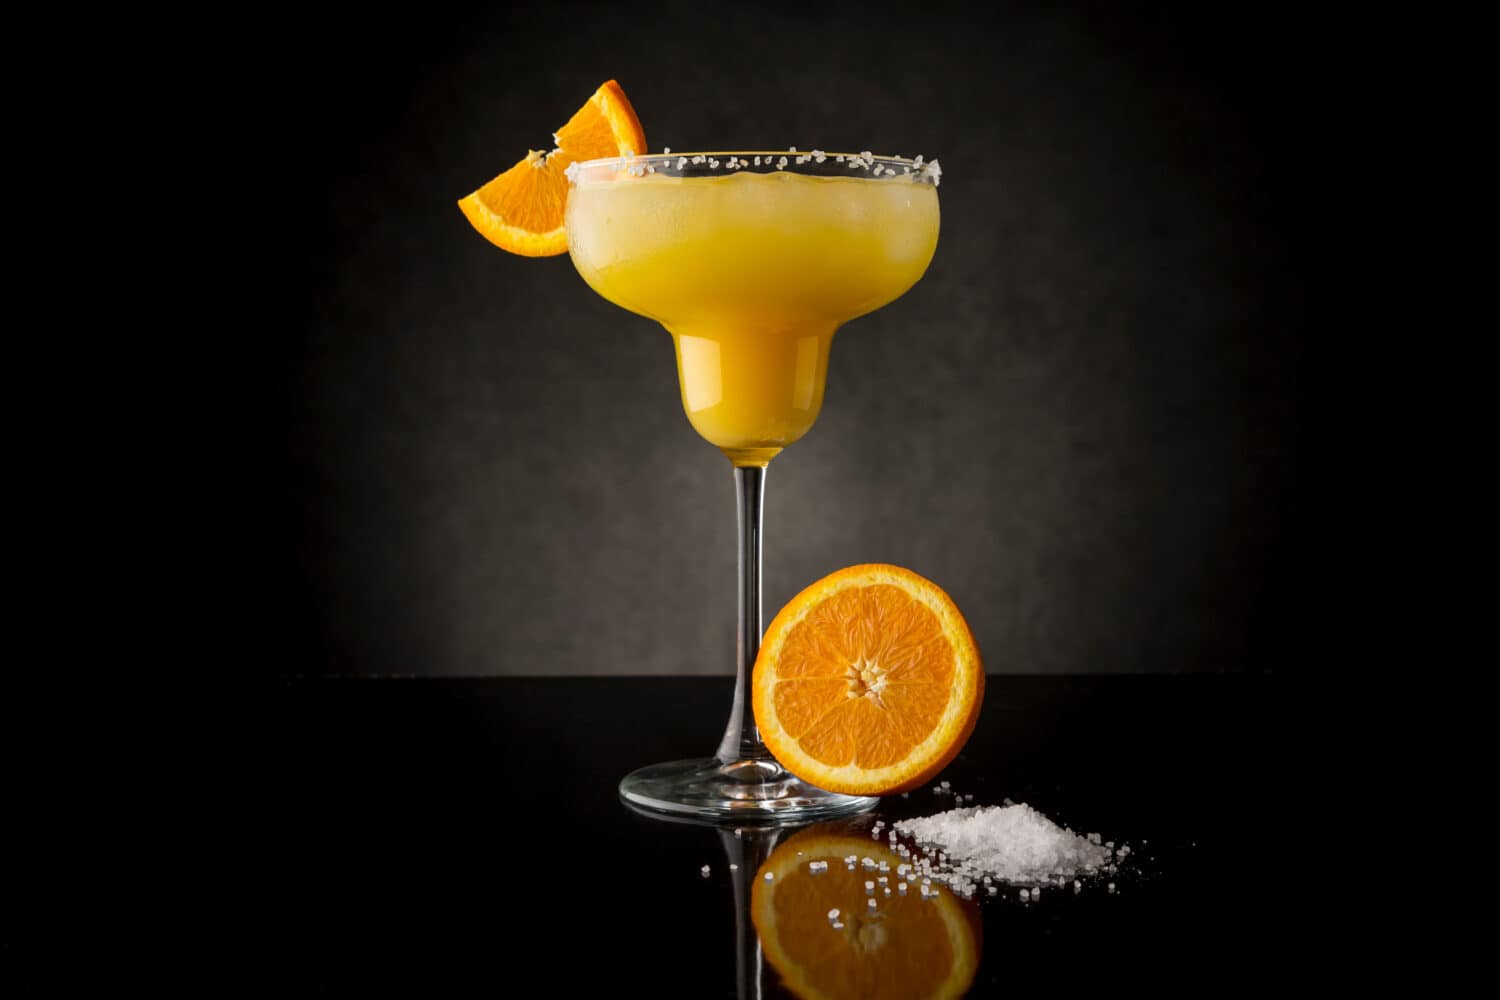 Orange margarita cocktail with tequila, triple sec, orange juice, crushed ice and some salt on the rim of a glass, decorated with a slice of orange